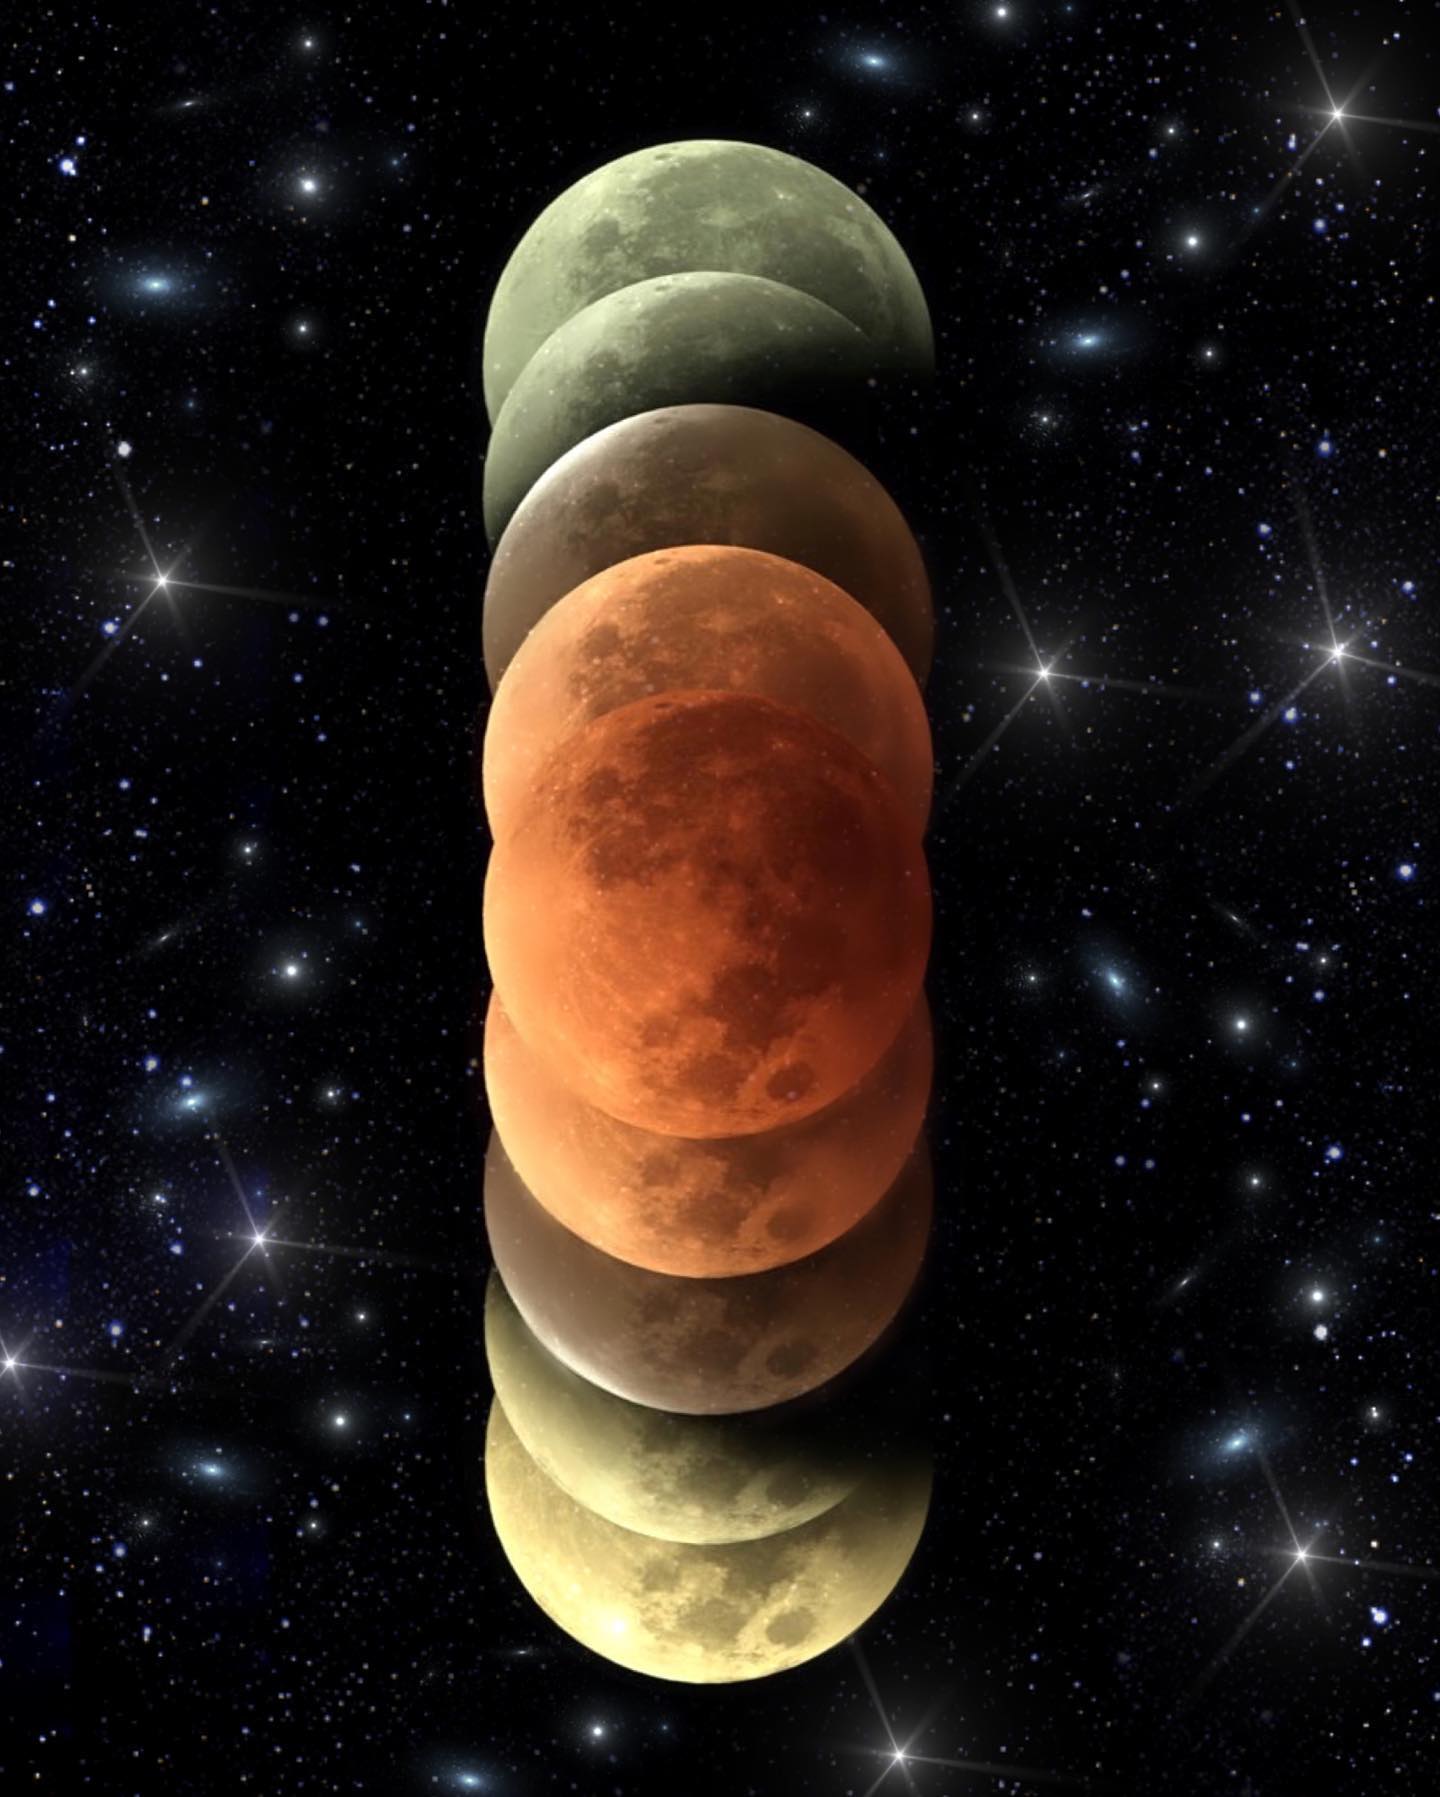 The Penumbral Lunar Eclipse In Capricorn Of July 5, 2020.